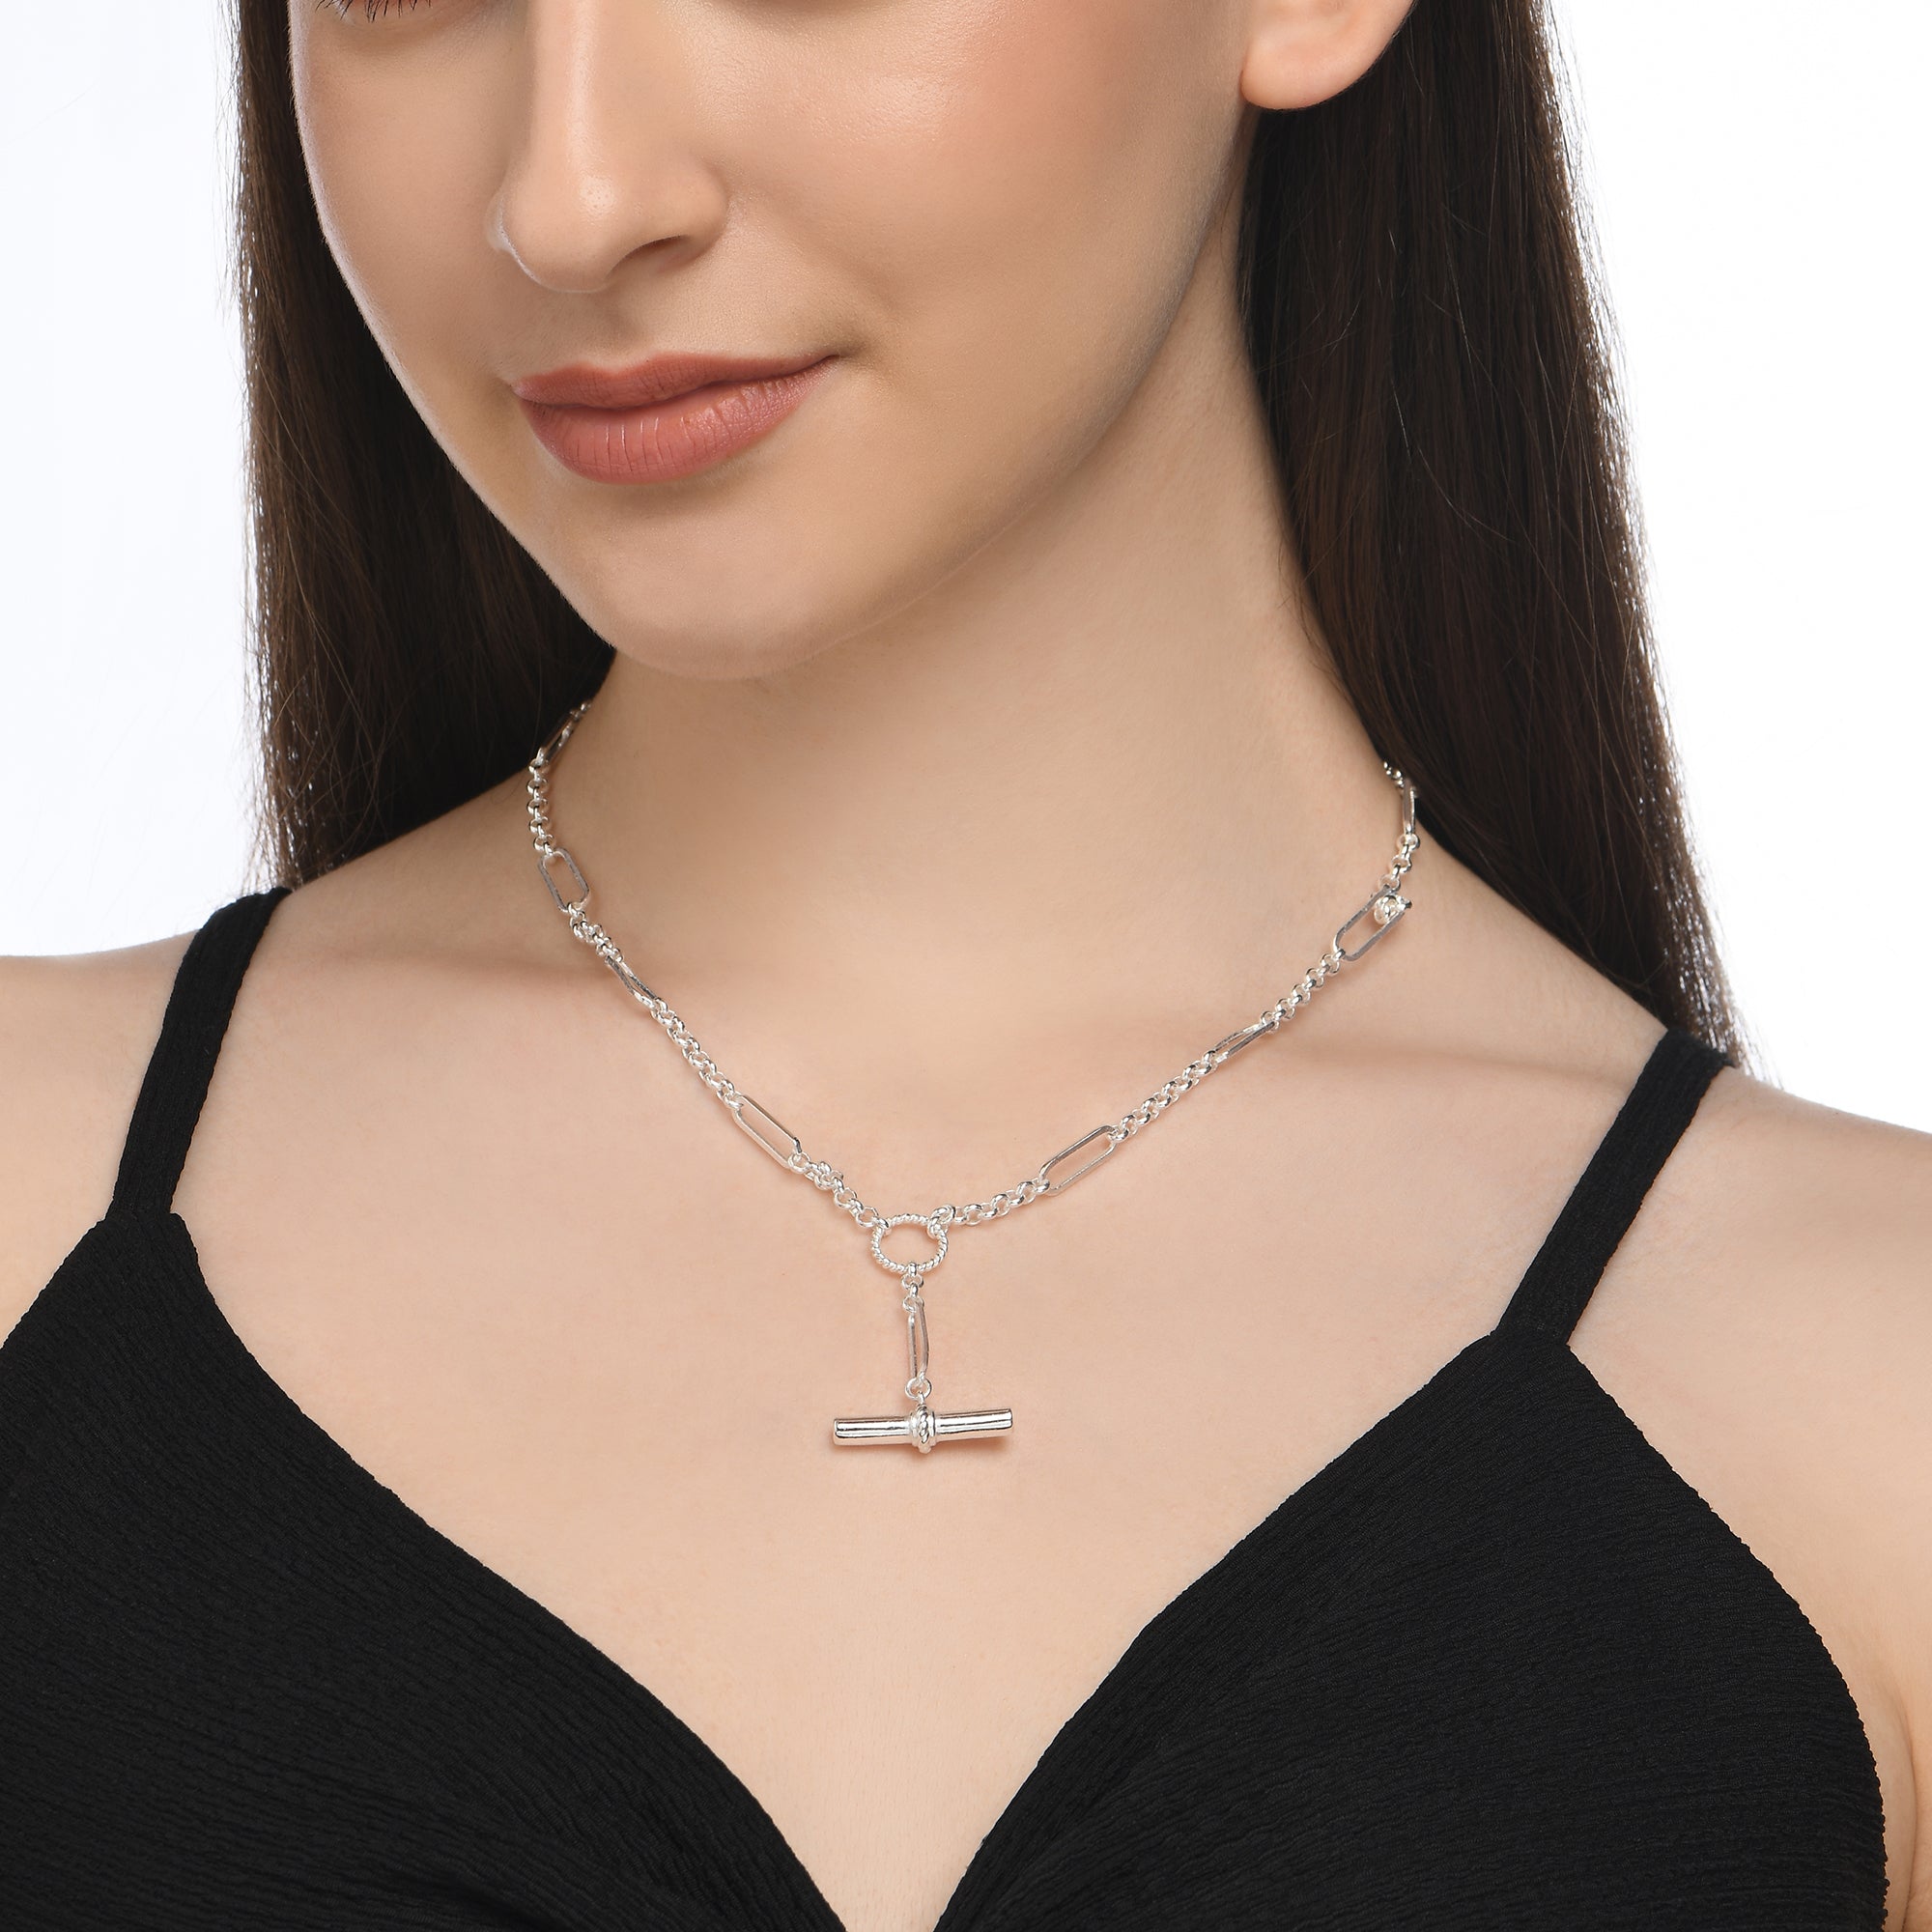 925 Pure Sterling Silver Plated Twist T-Bar Necklace